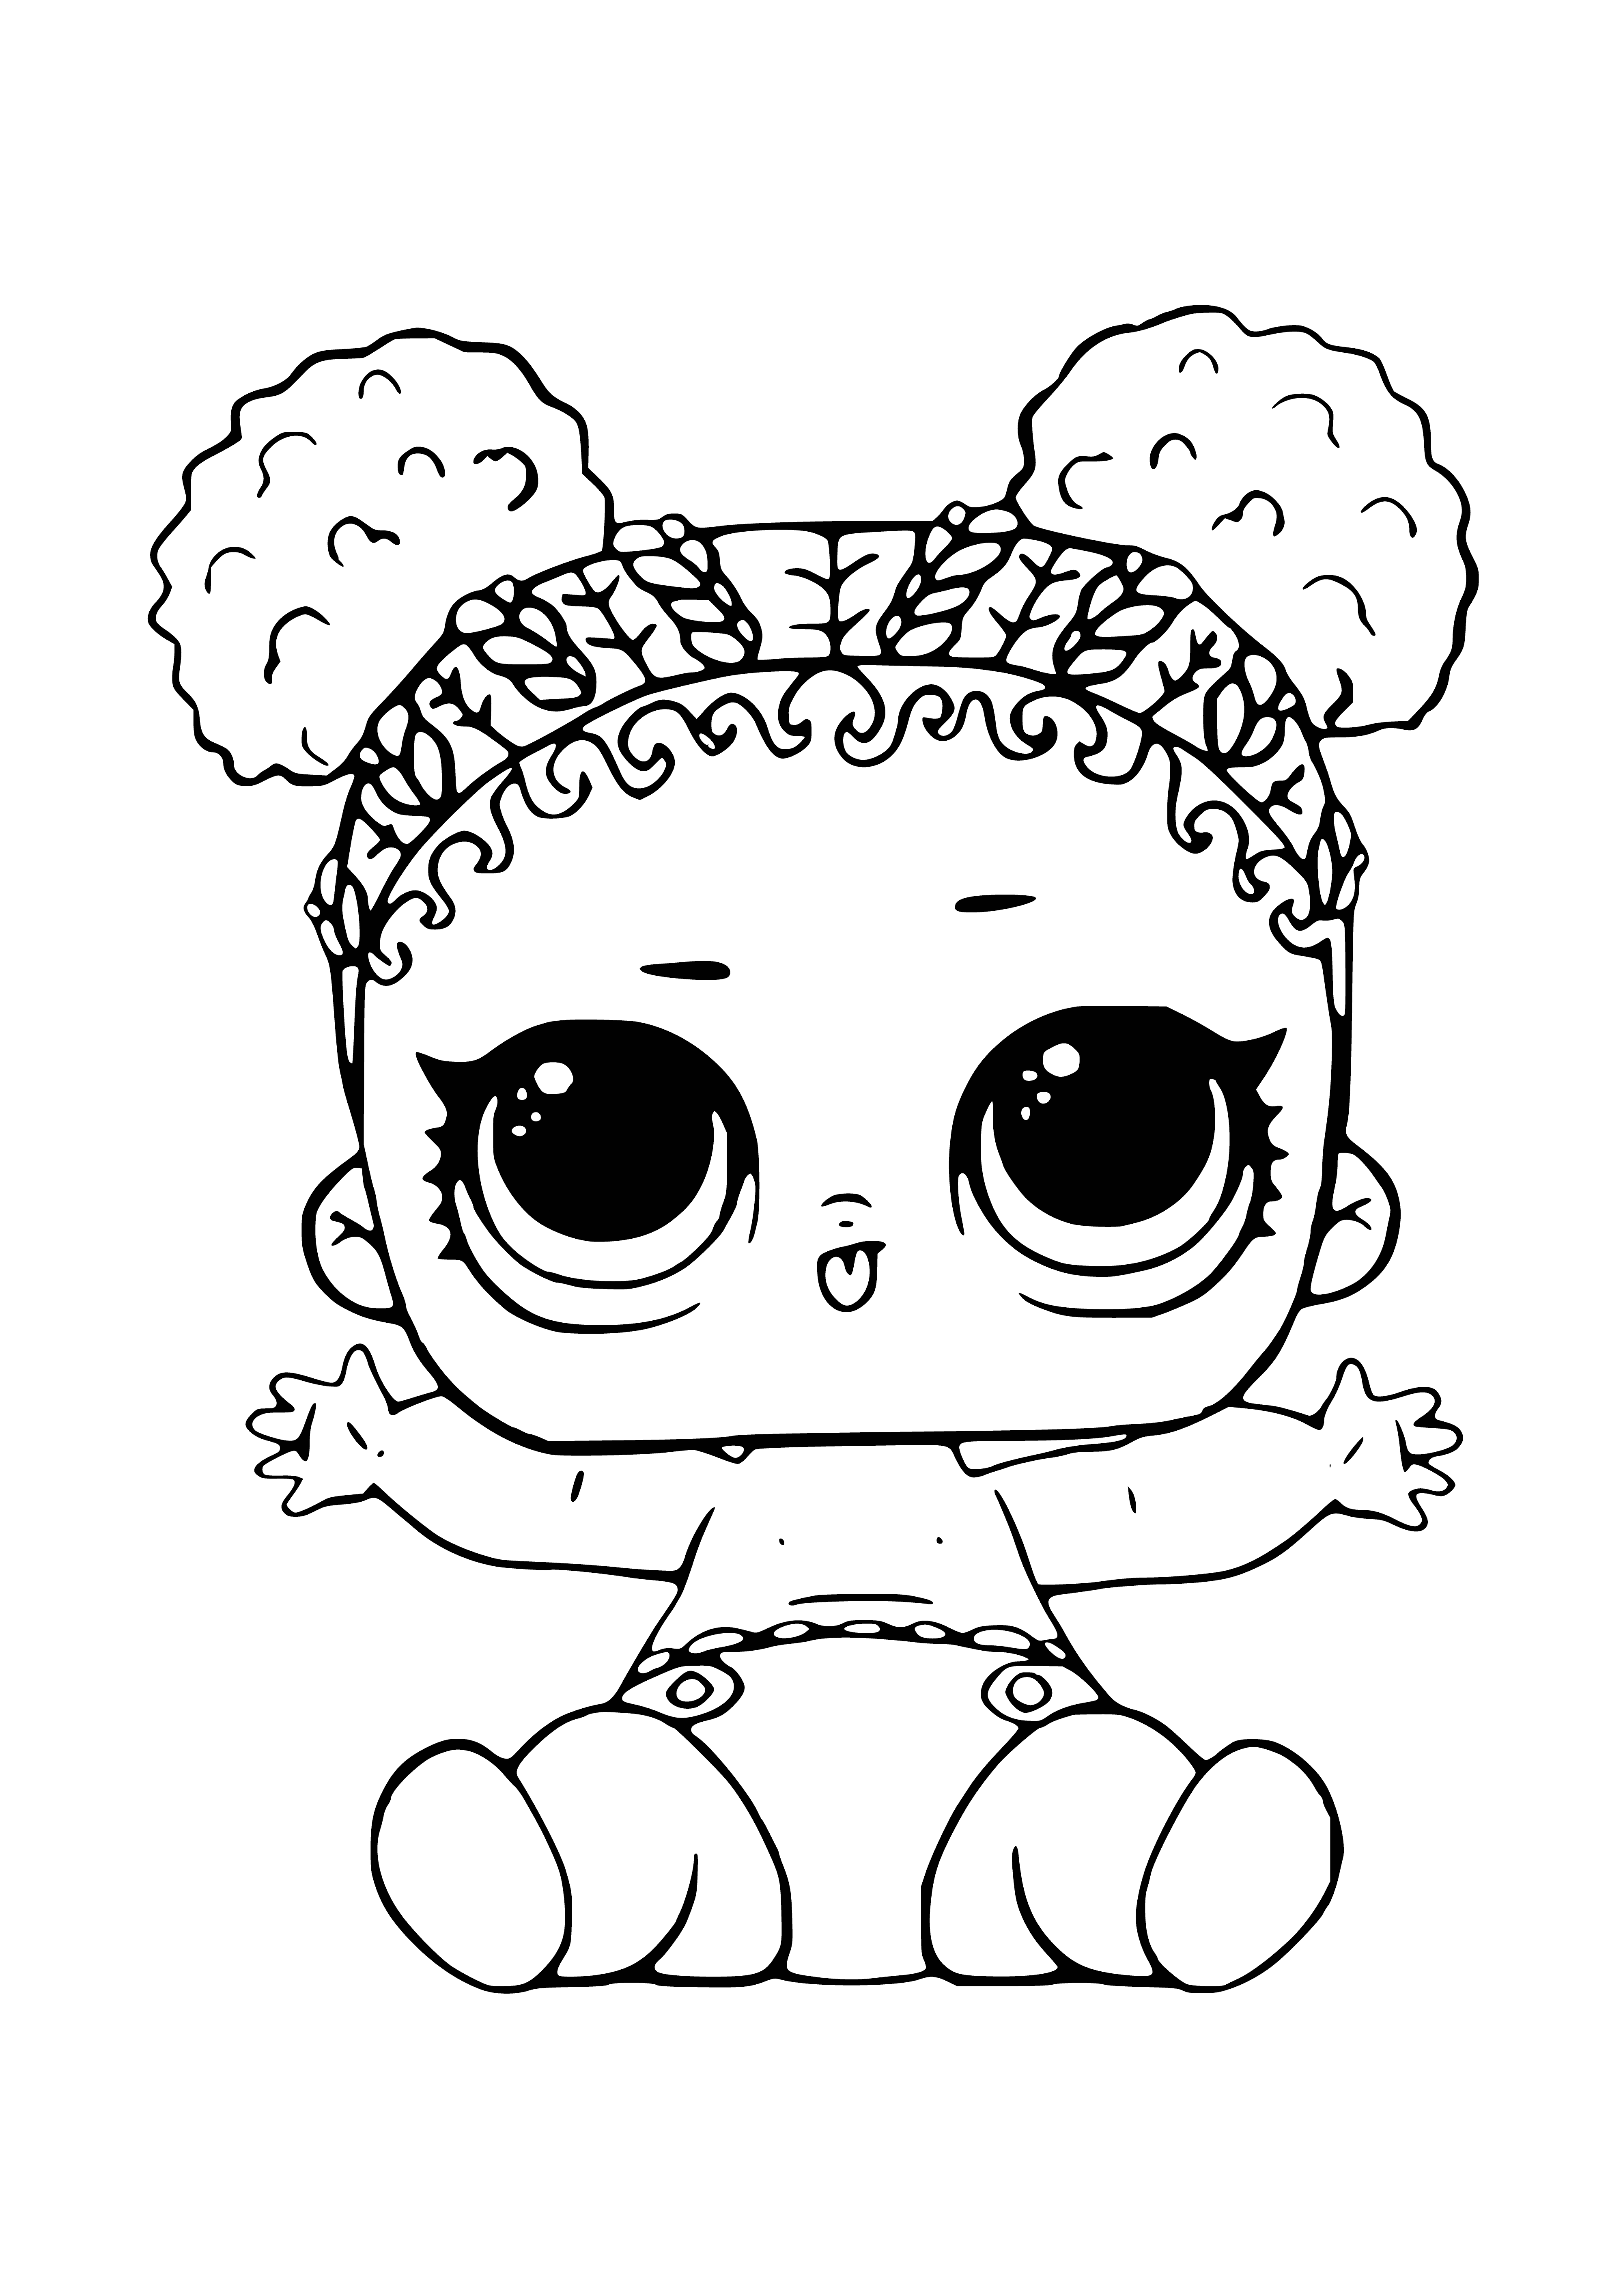 LOL baby Accuser coloring page